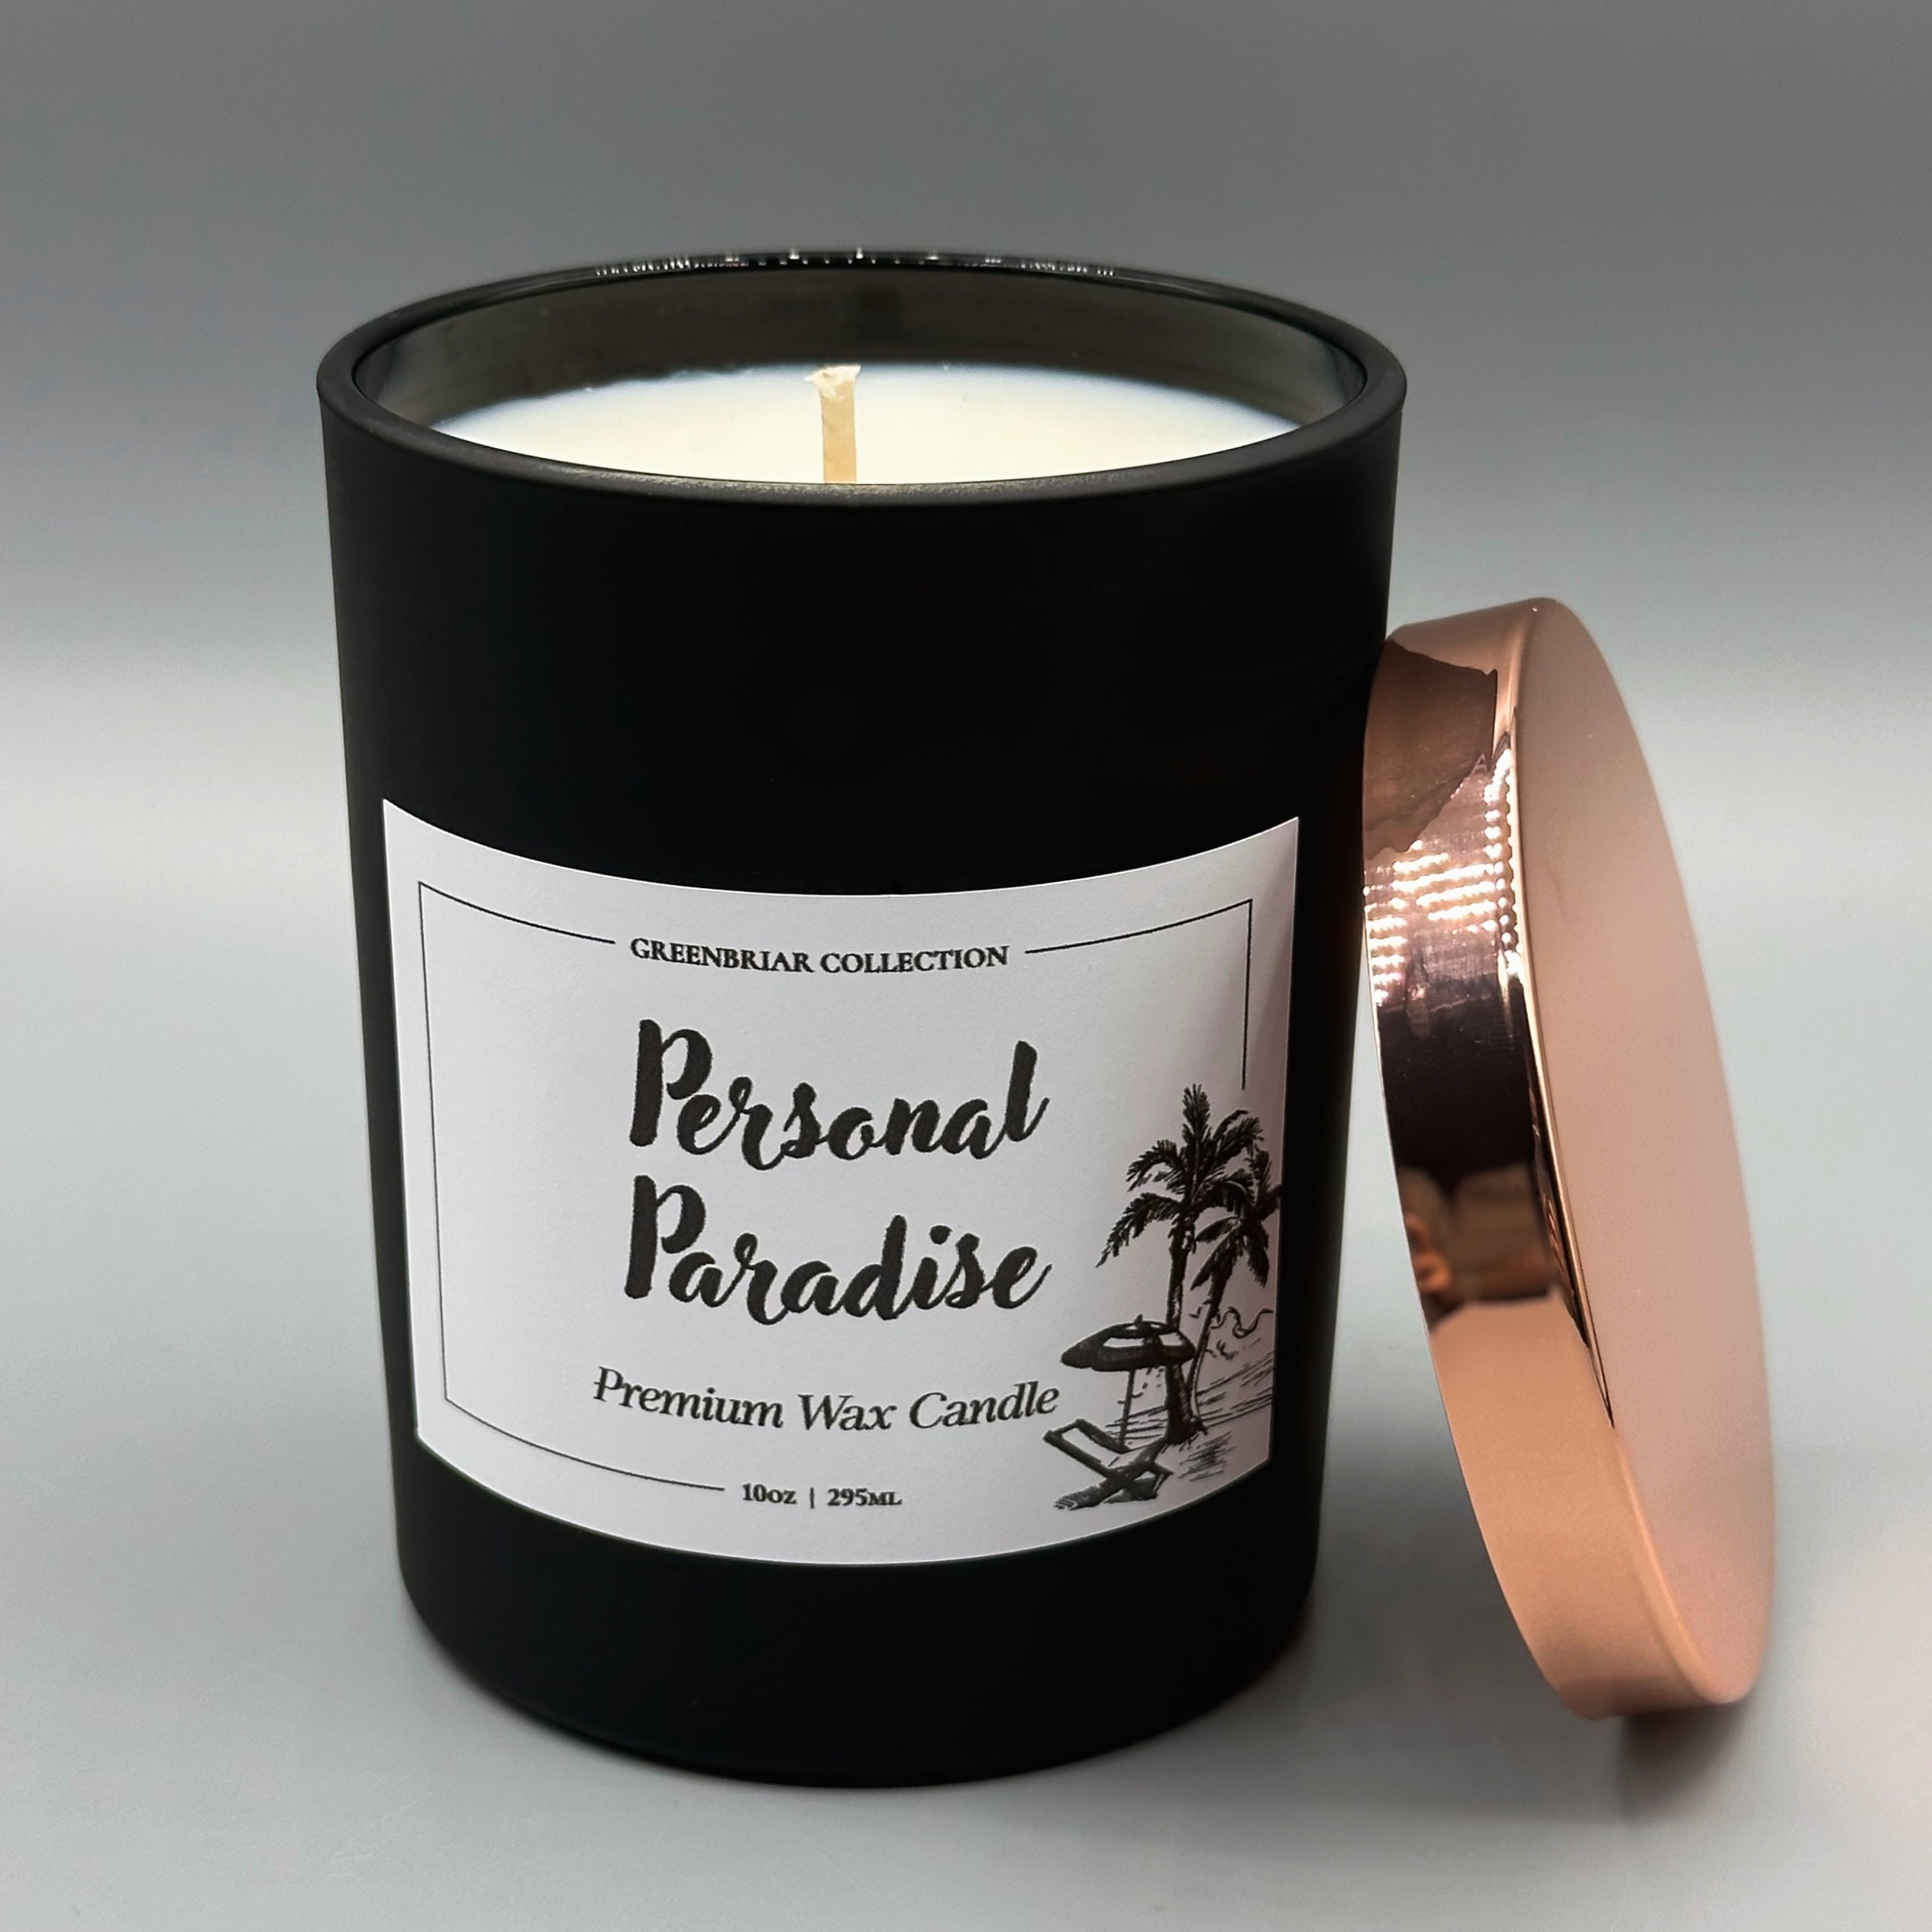 Premium Wax Candle | Personal Paradise